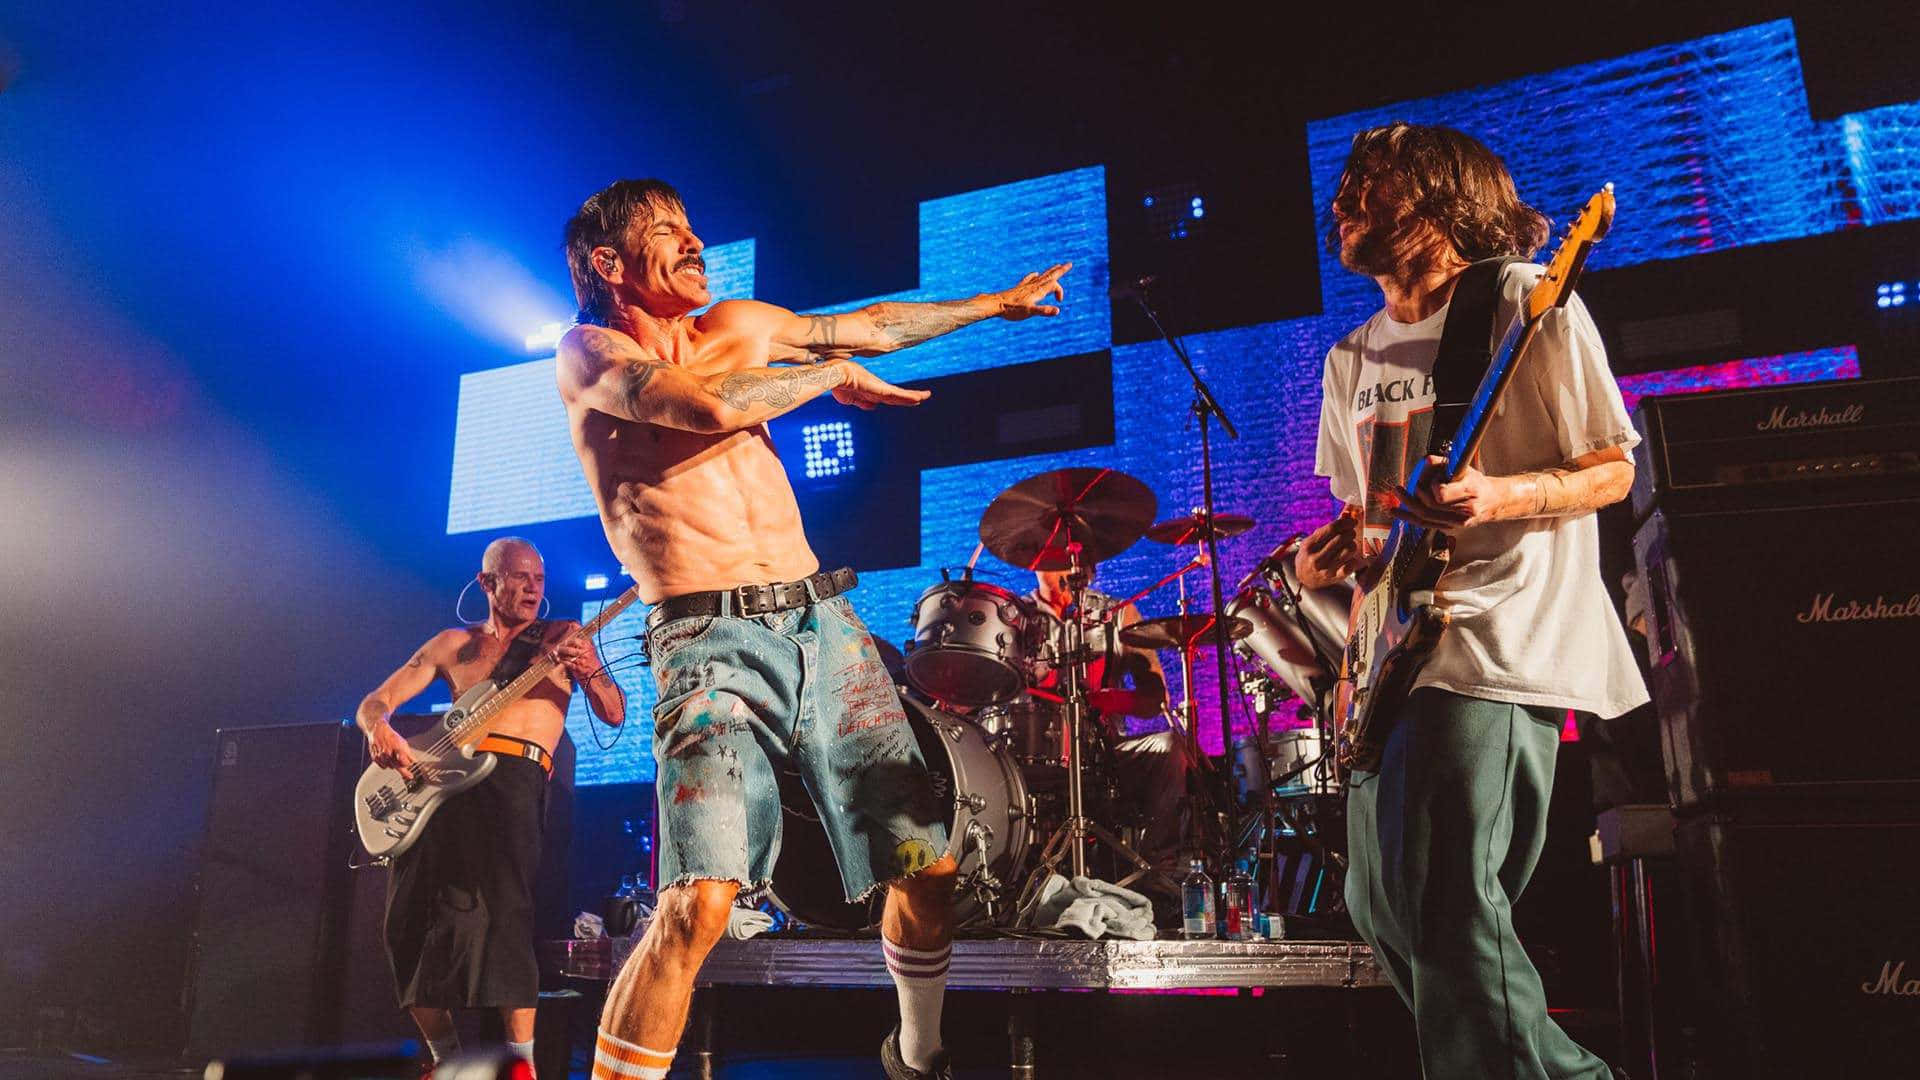 The Red Hot Chili Peppers performing together on stage Wallpaper